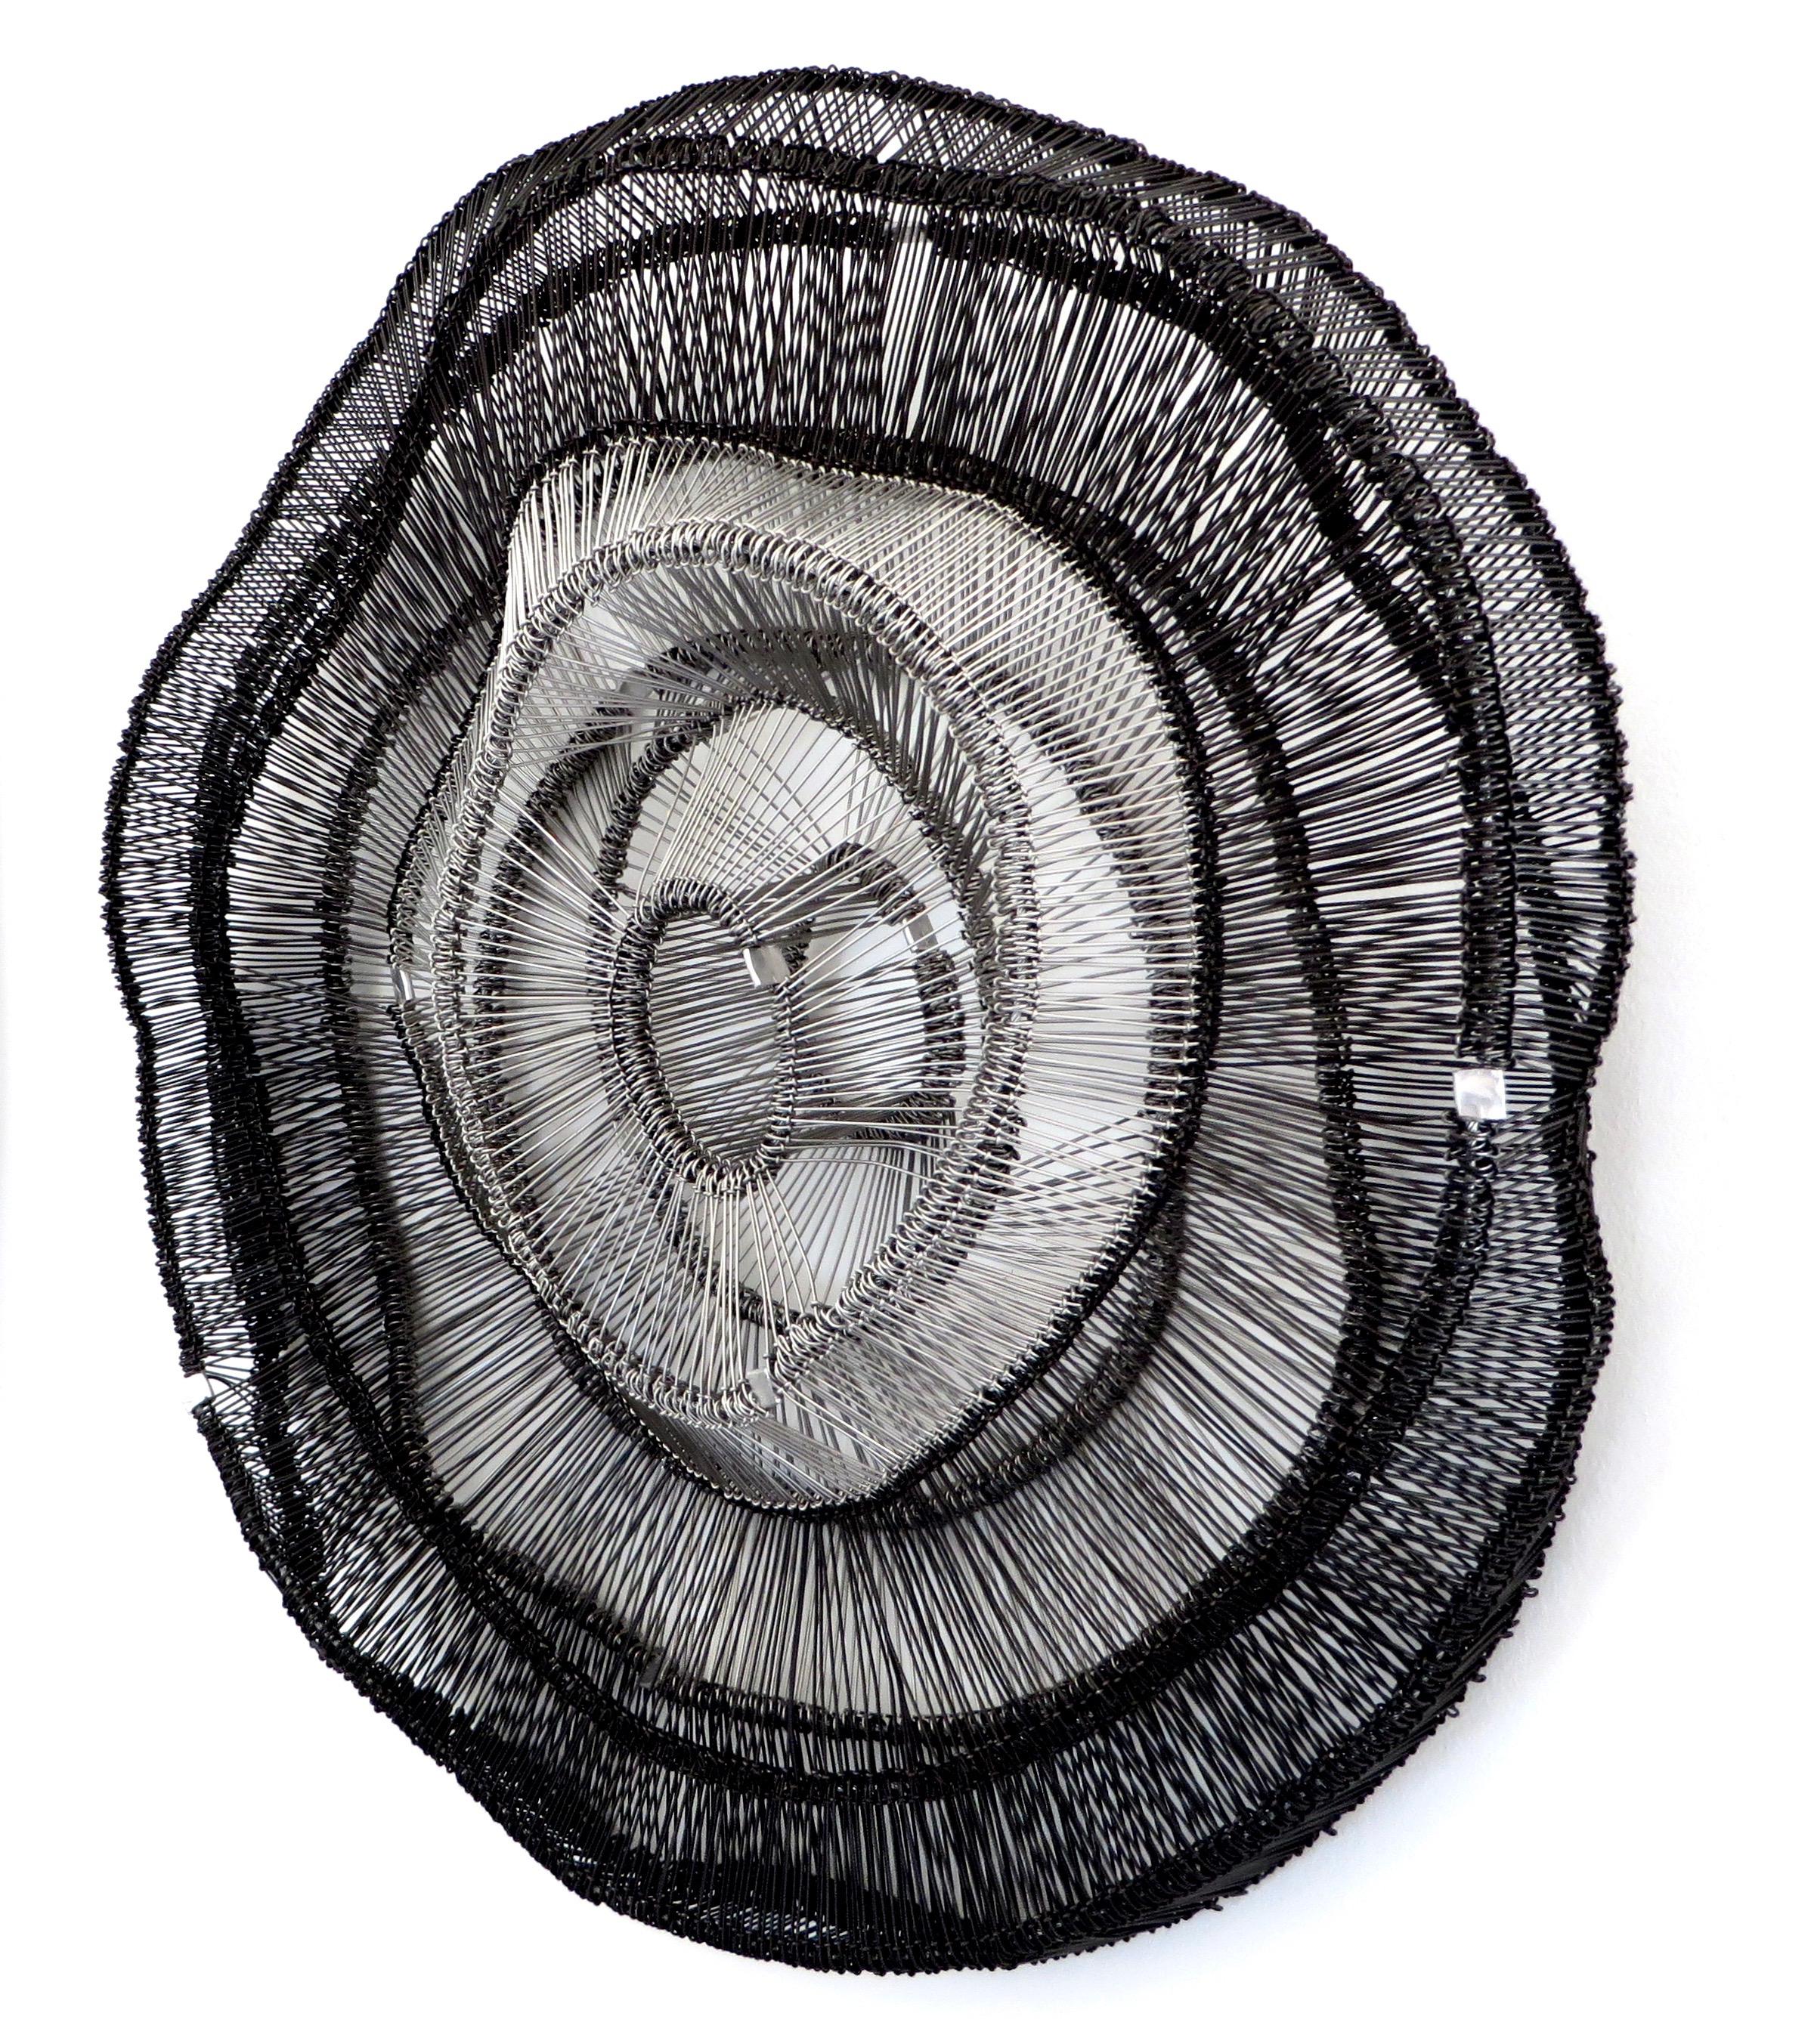 Contemporary Artist Eric Gushee Emergence Series Woven Wire Wall Sculpture